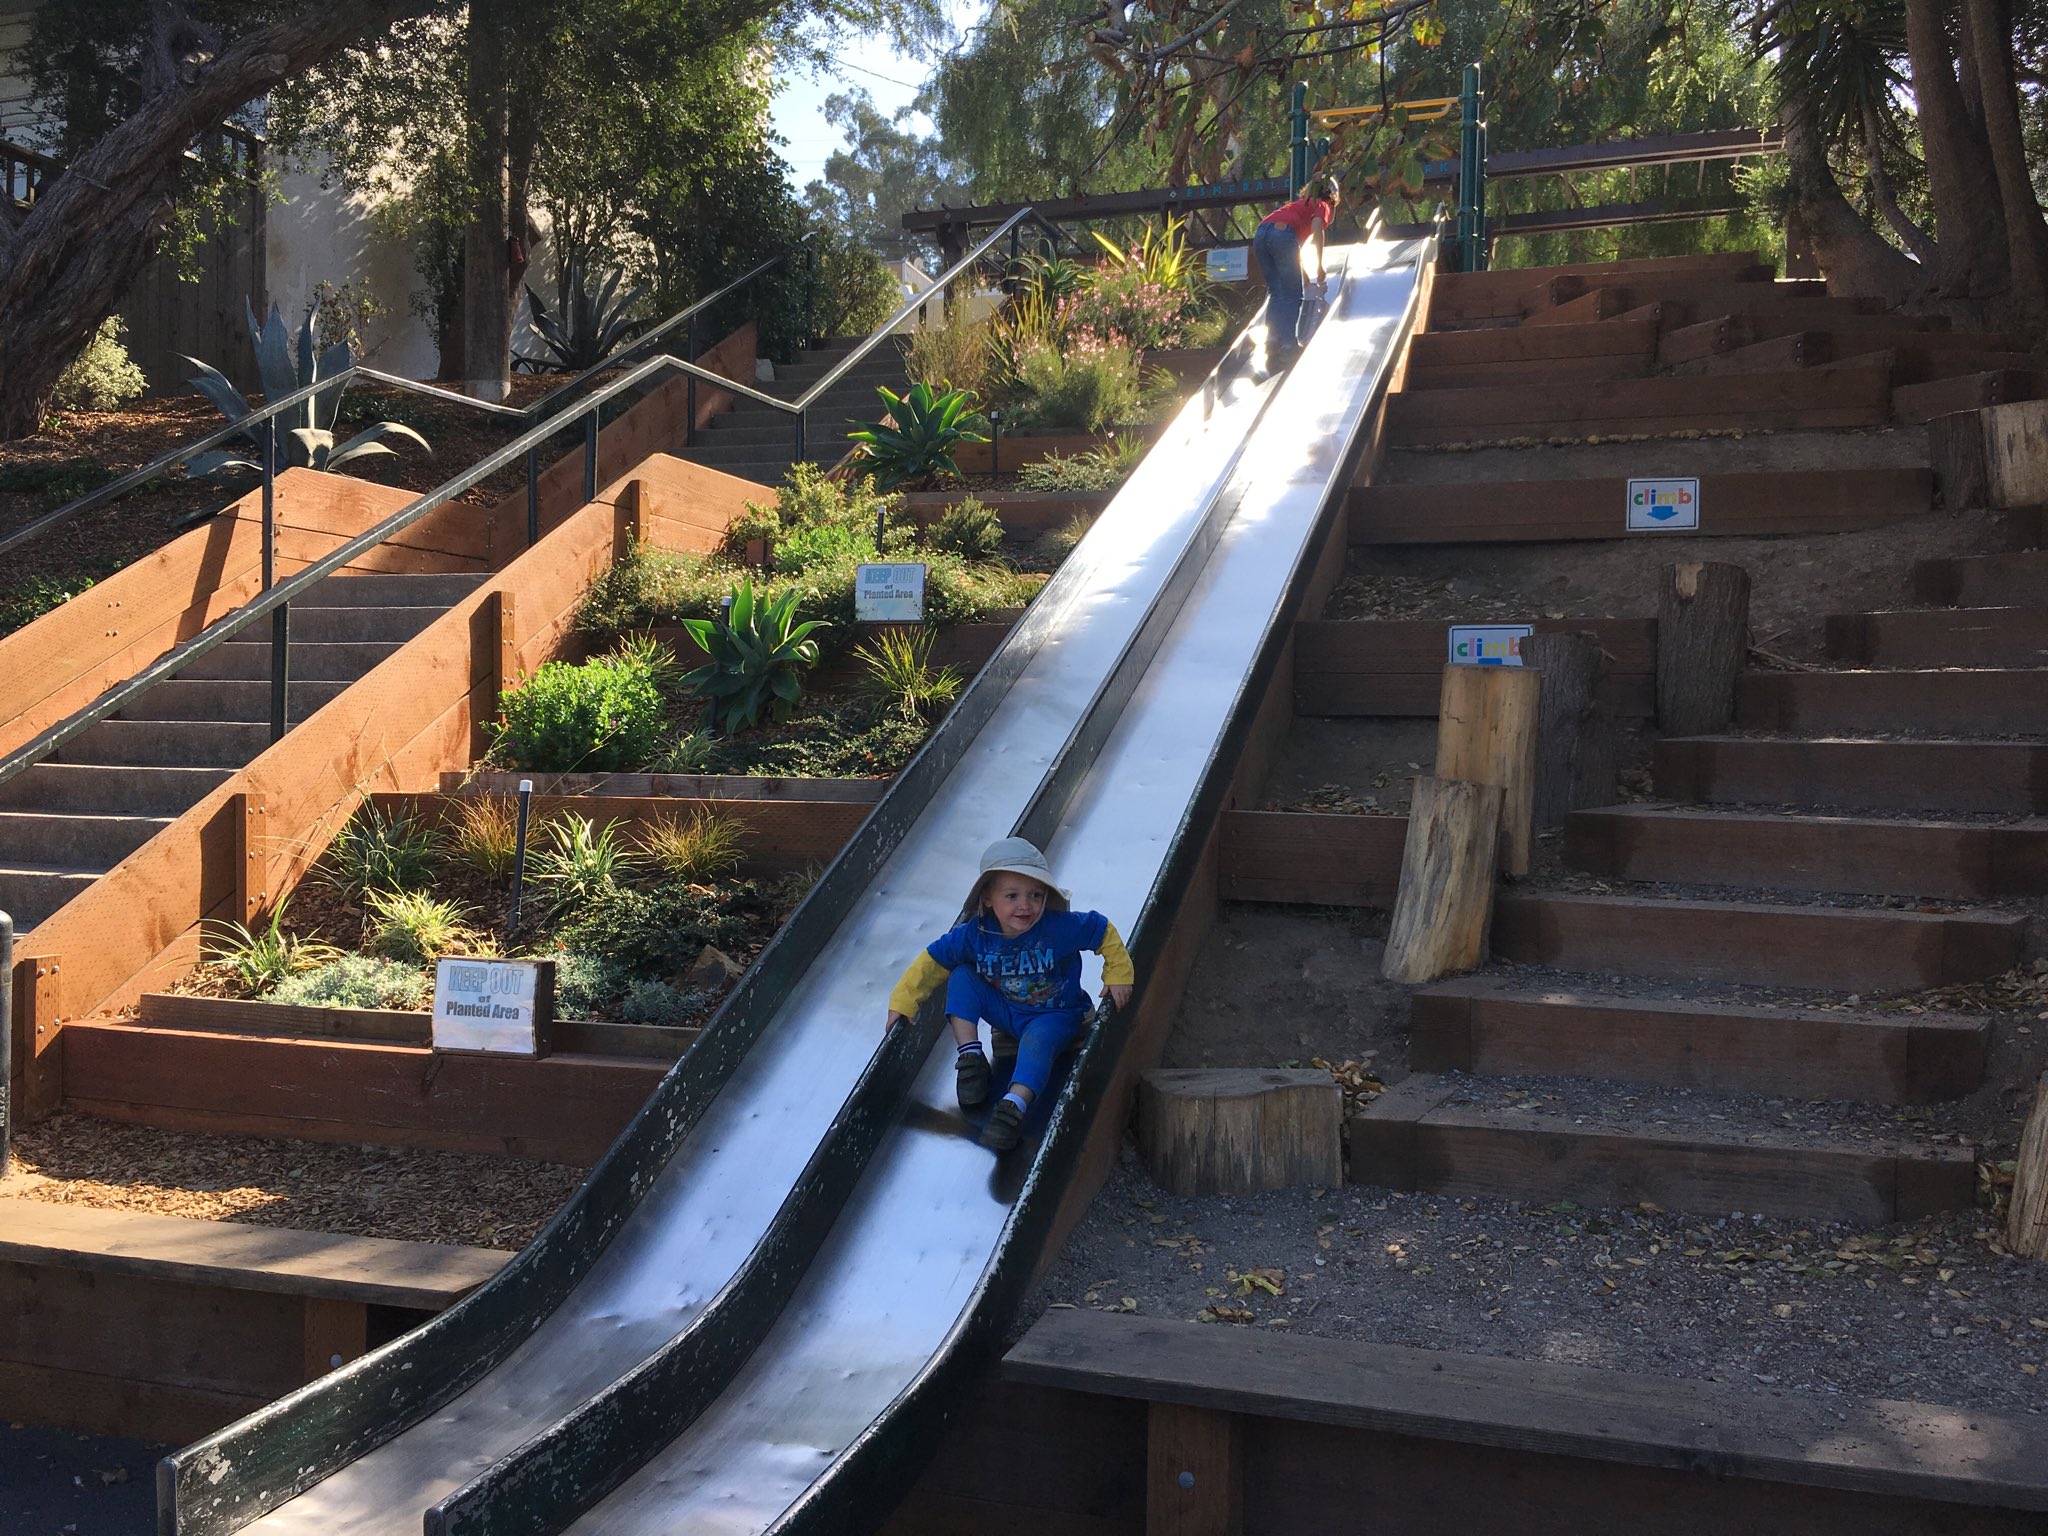 In the middle of the picture are two metal slides next to each other. Julian is almost to the bottom of the slide on the right. To the far left are stairs and in between the stairs and the slide are terraced garden beds. On the right is another set of  stairs made from each and railroad ties.